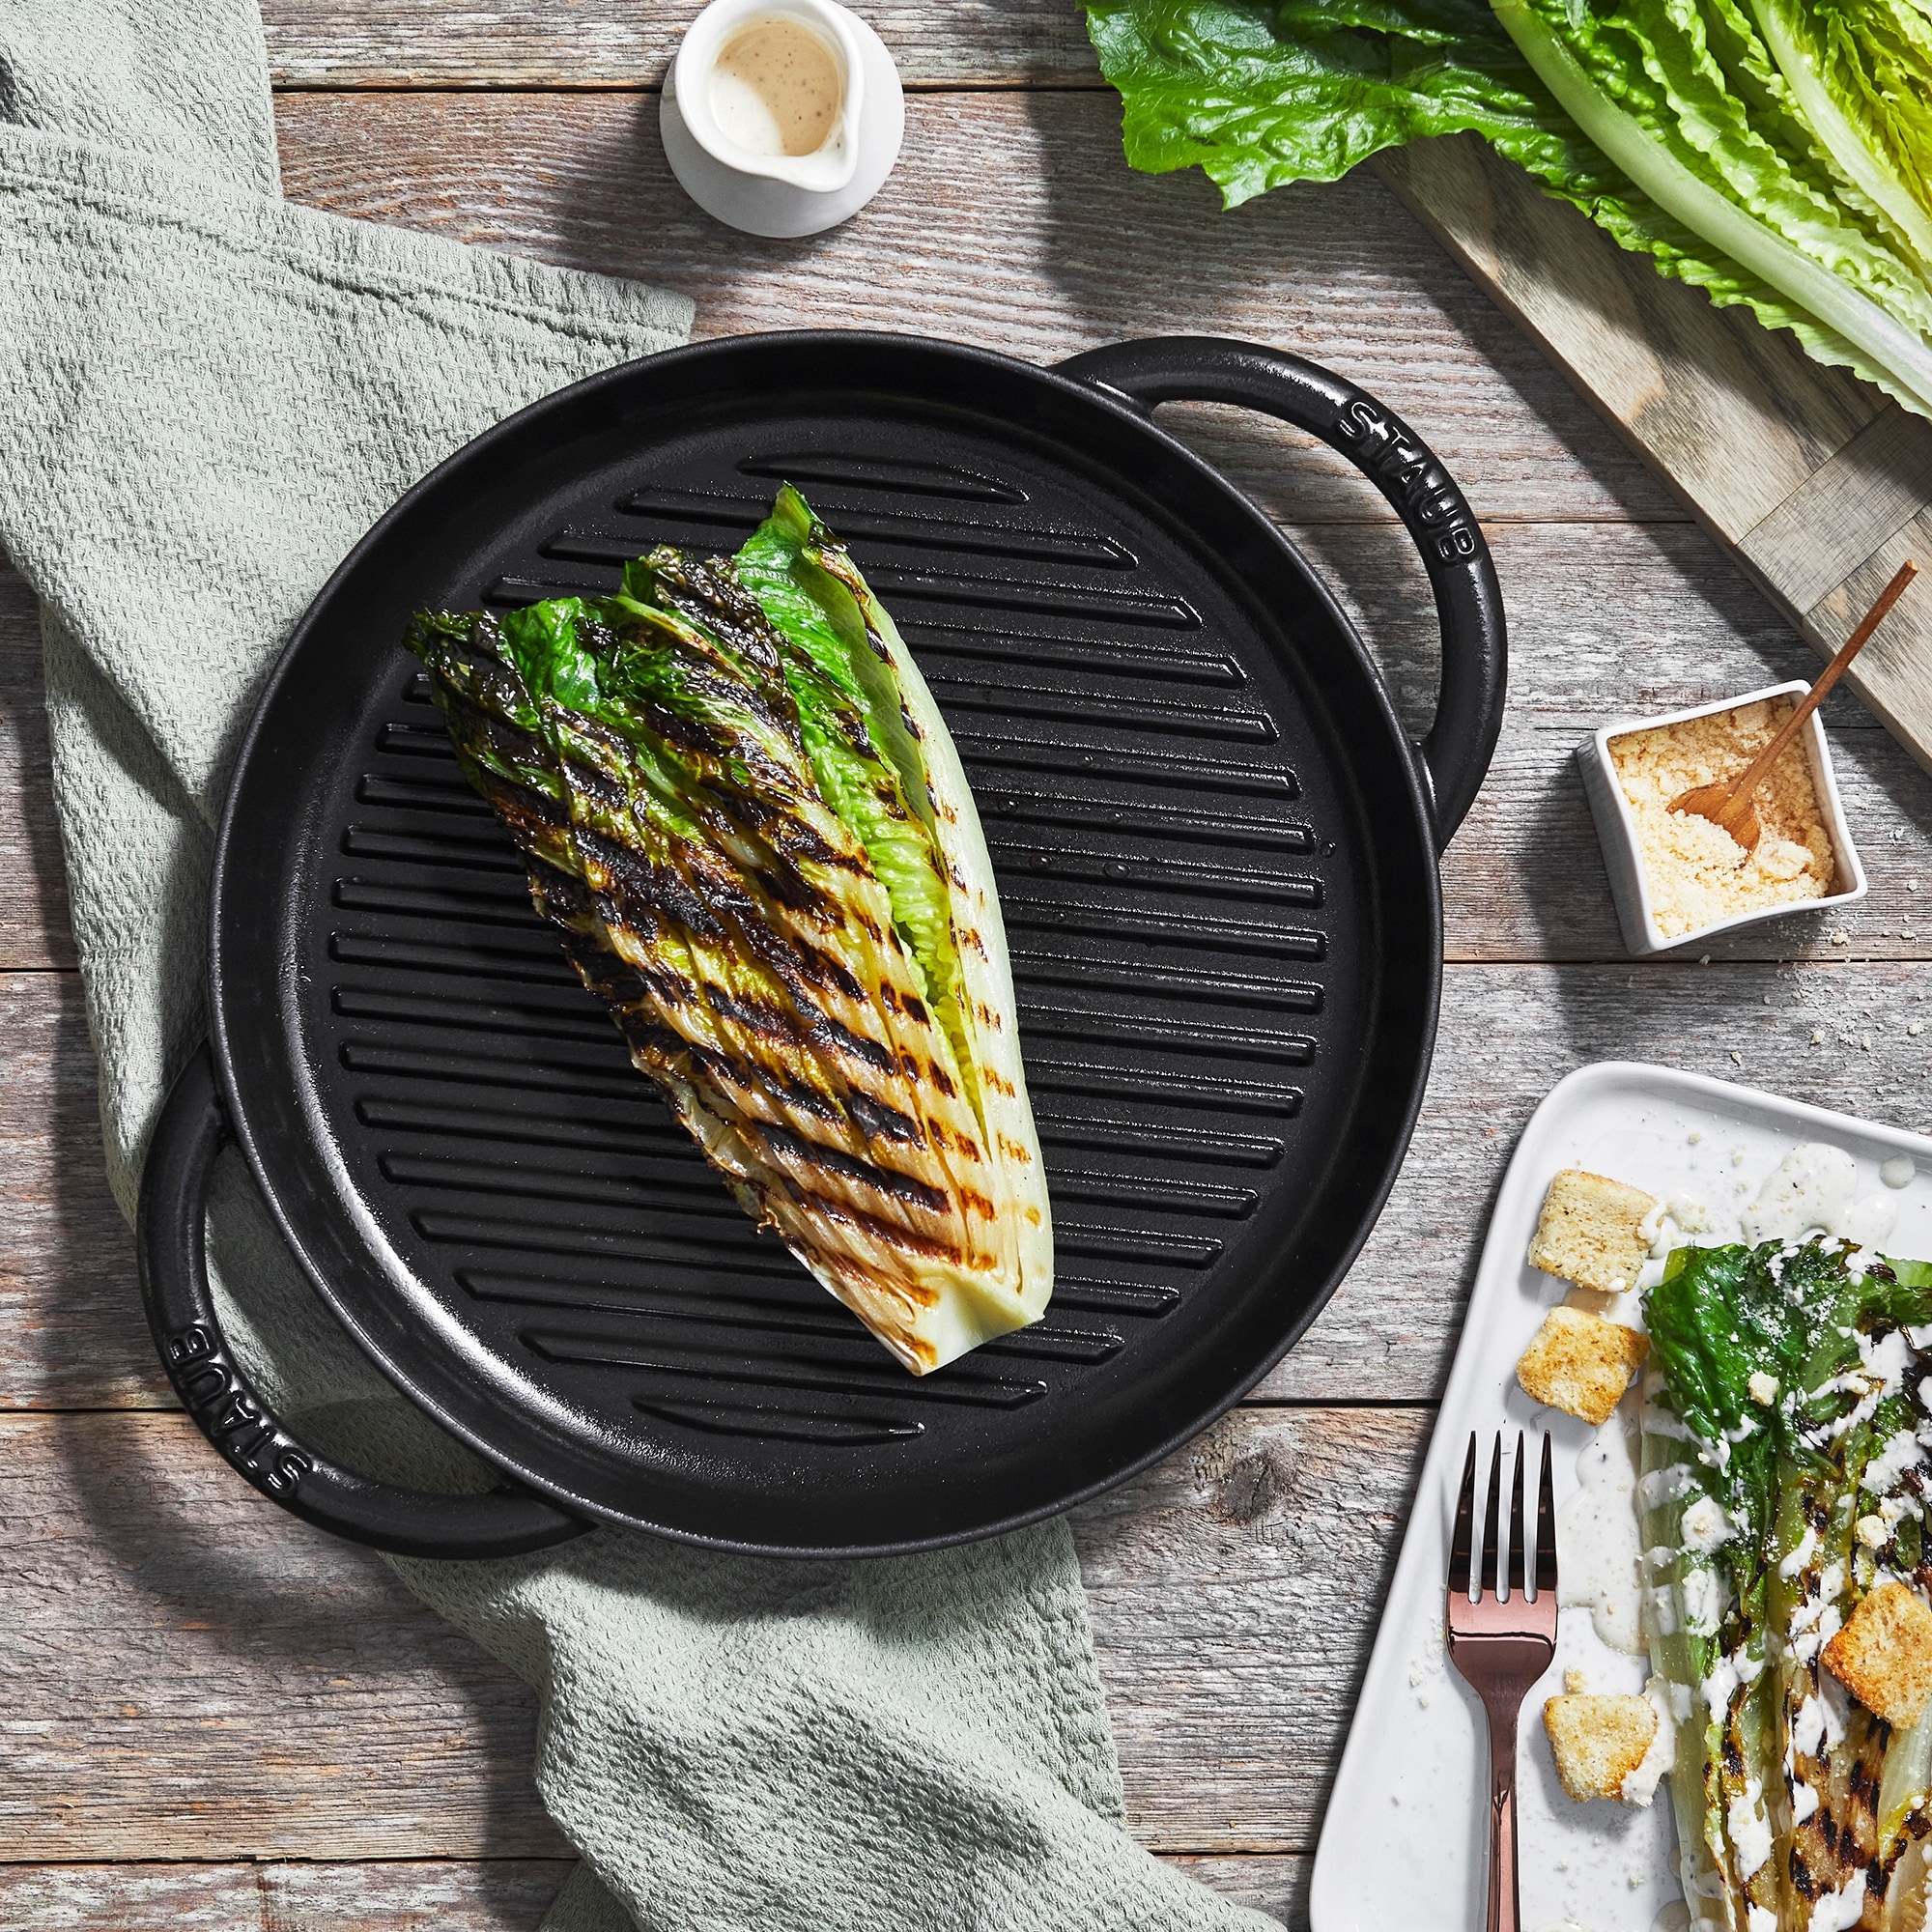 https://ak1.ostkcdn.com/images/products/is/images/direct/4915b5750d3f4c95bfc59ba0419241e089470c7b/STAUB-Cast-Iron-10-inch-Pure-Grill.jpg